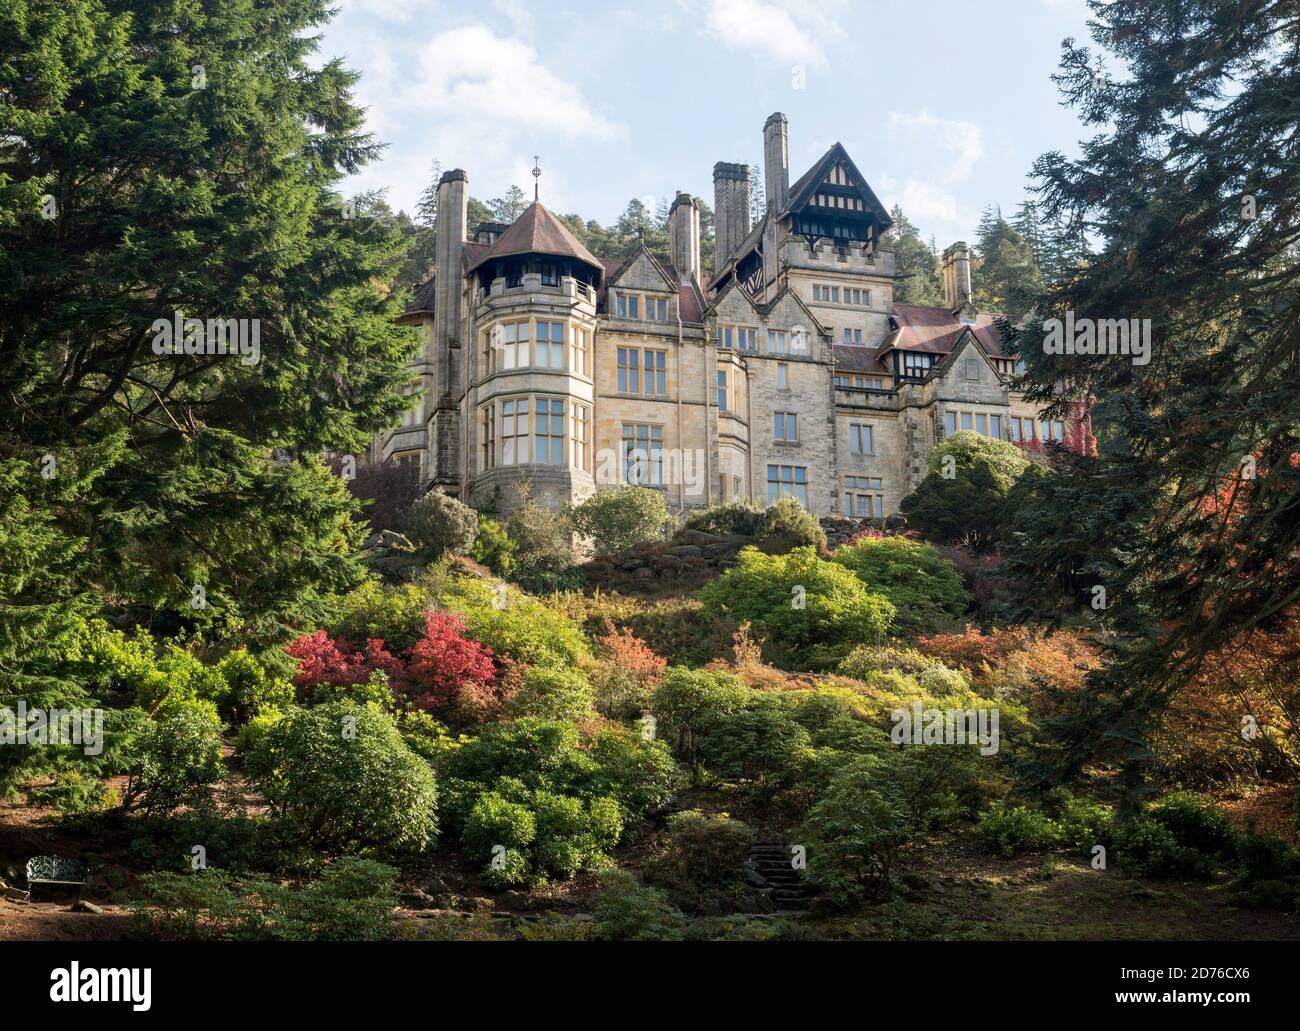 Cragside House High Resolution Stock Photography and Images - Alamy